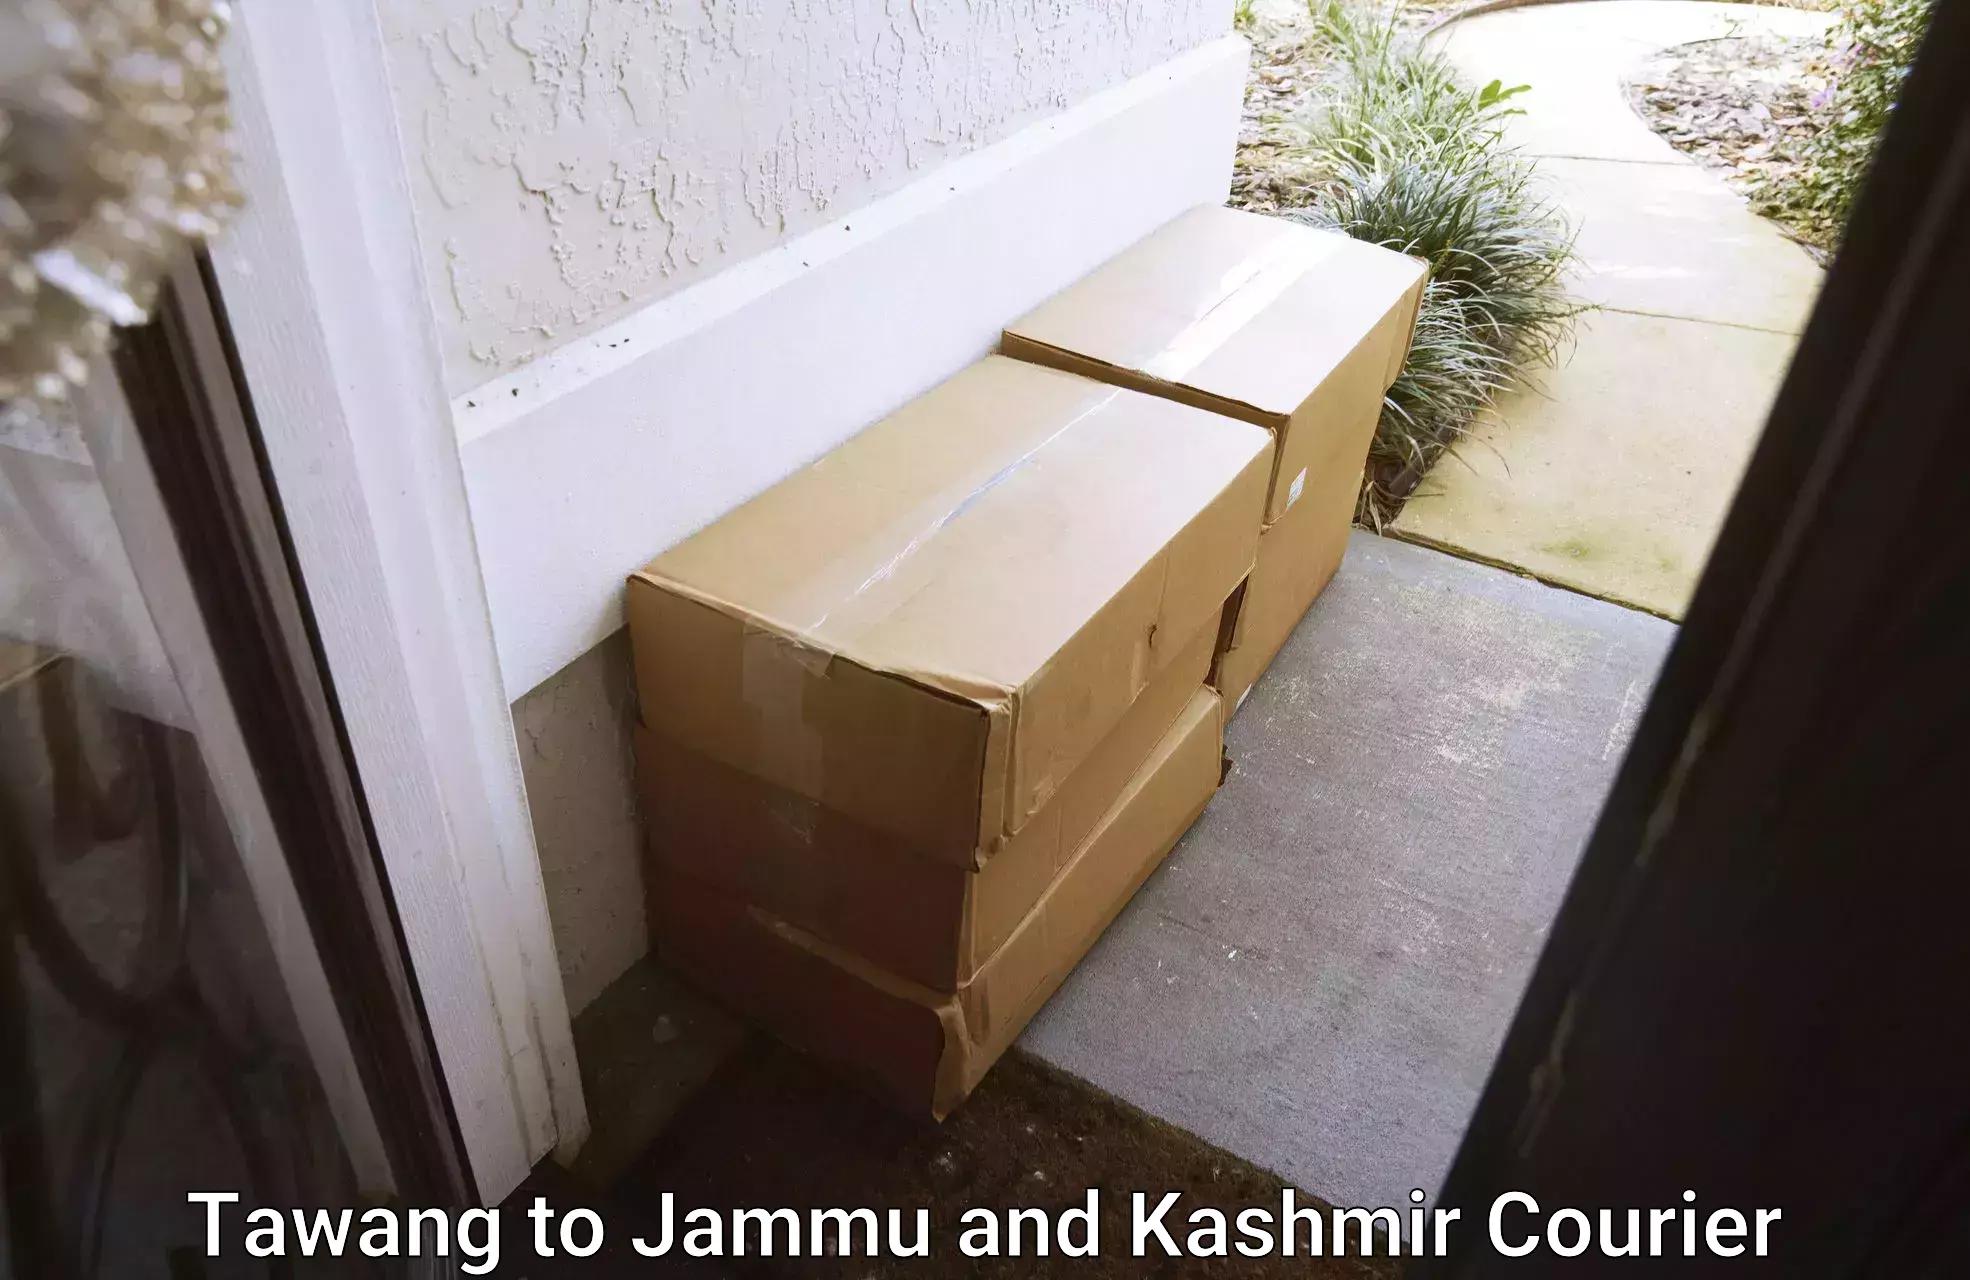 Courier service efficiency Tawang to Jammu and Kashmir